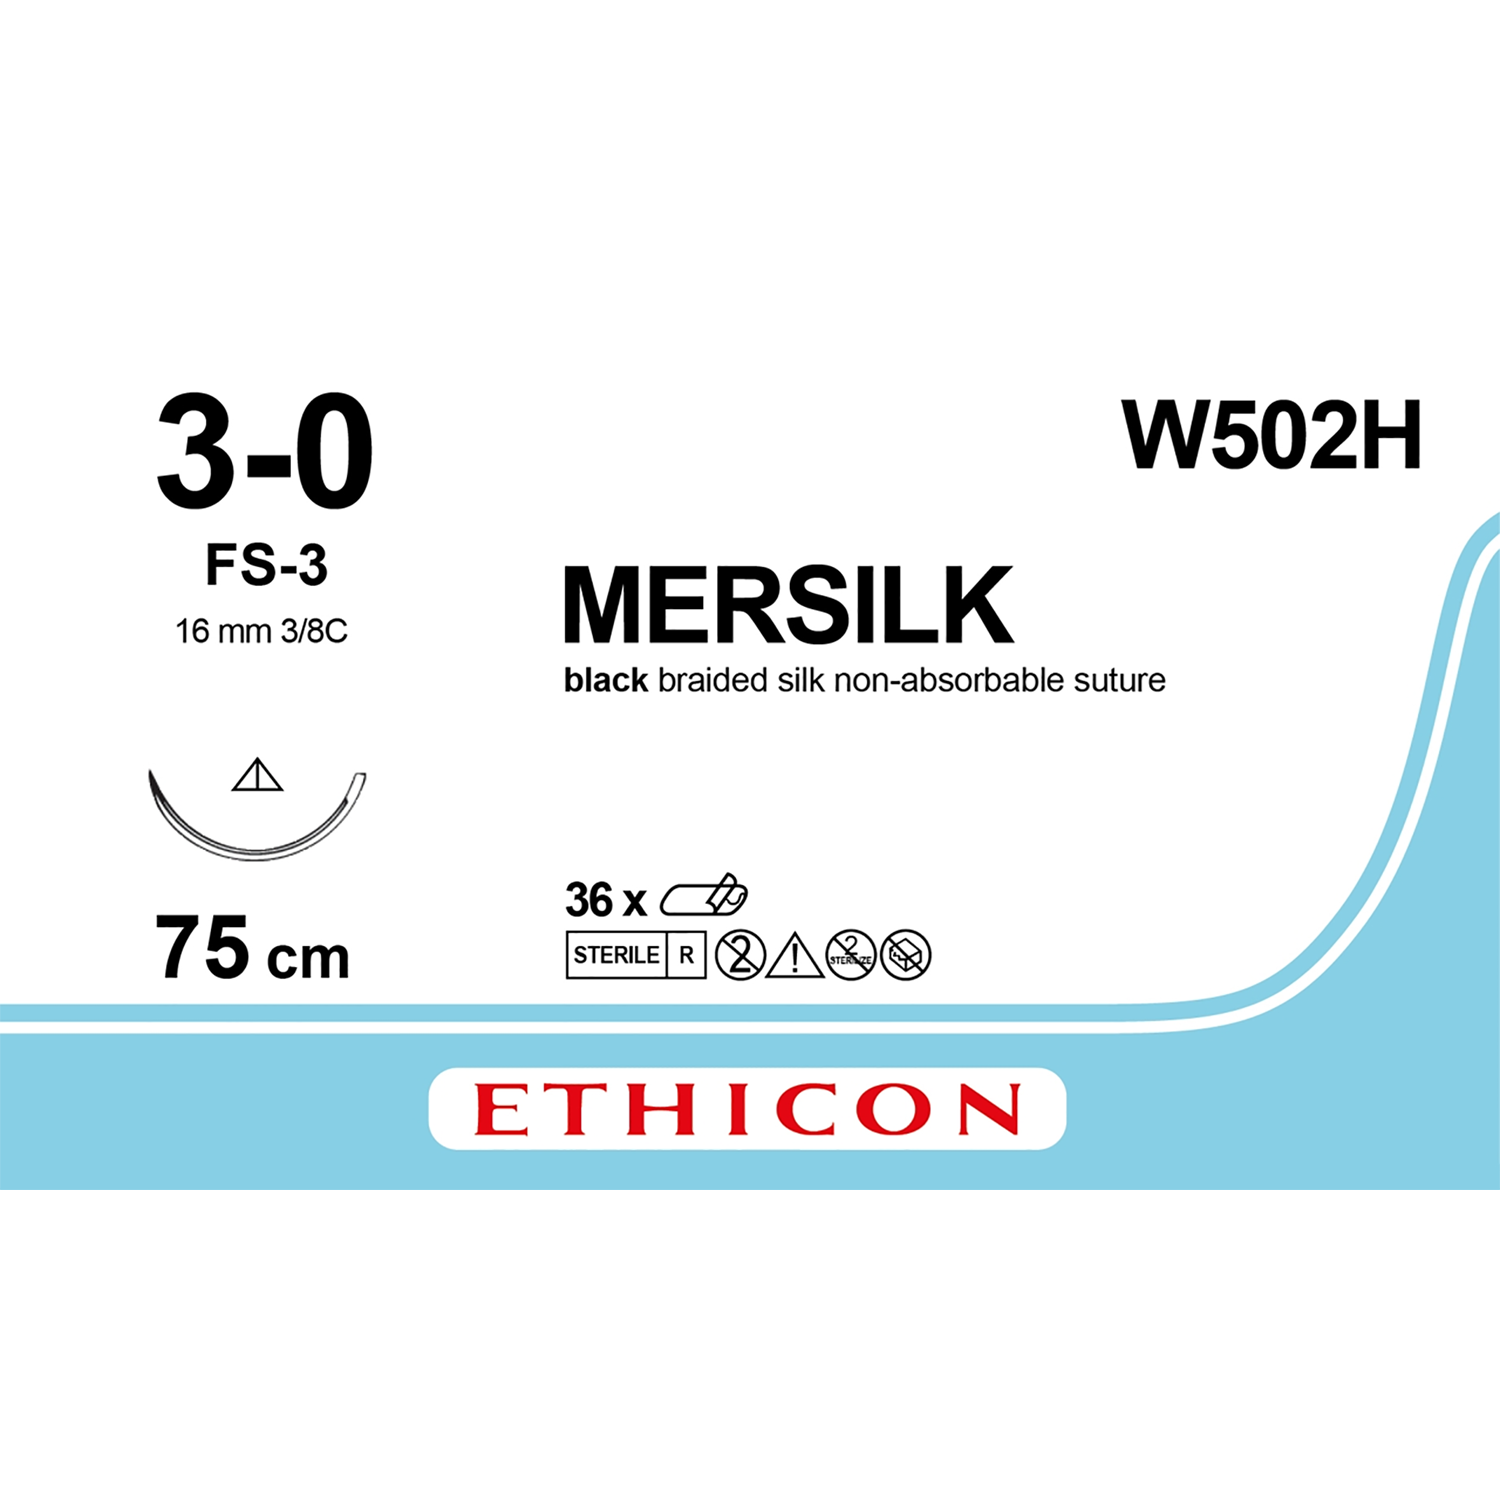 Ethicon Mersilk Suture | Non Absorbable | Black | Size: 3-0 | Length: 75cm | Needle: FS-3 | Pack of 36